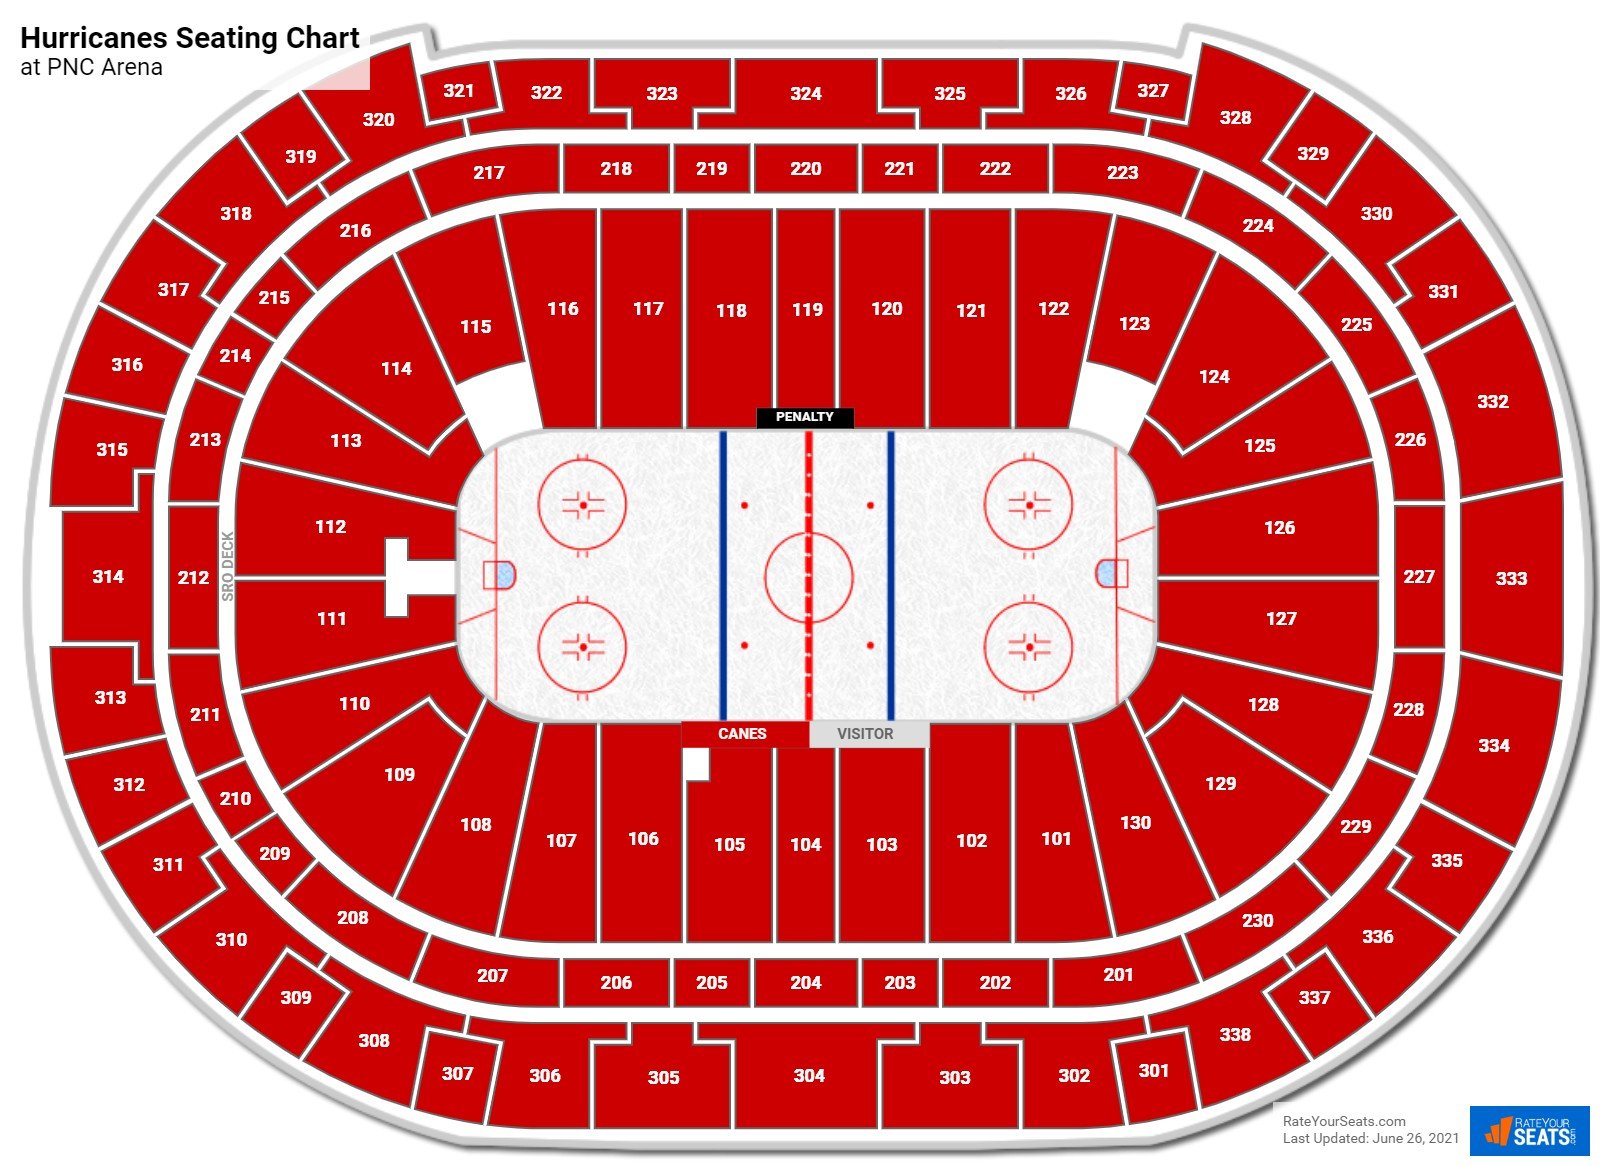 How Many Seats Are In A Row At Pnc Arena